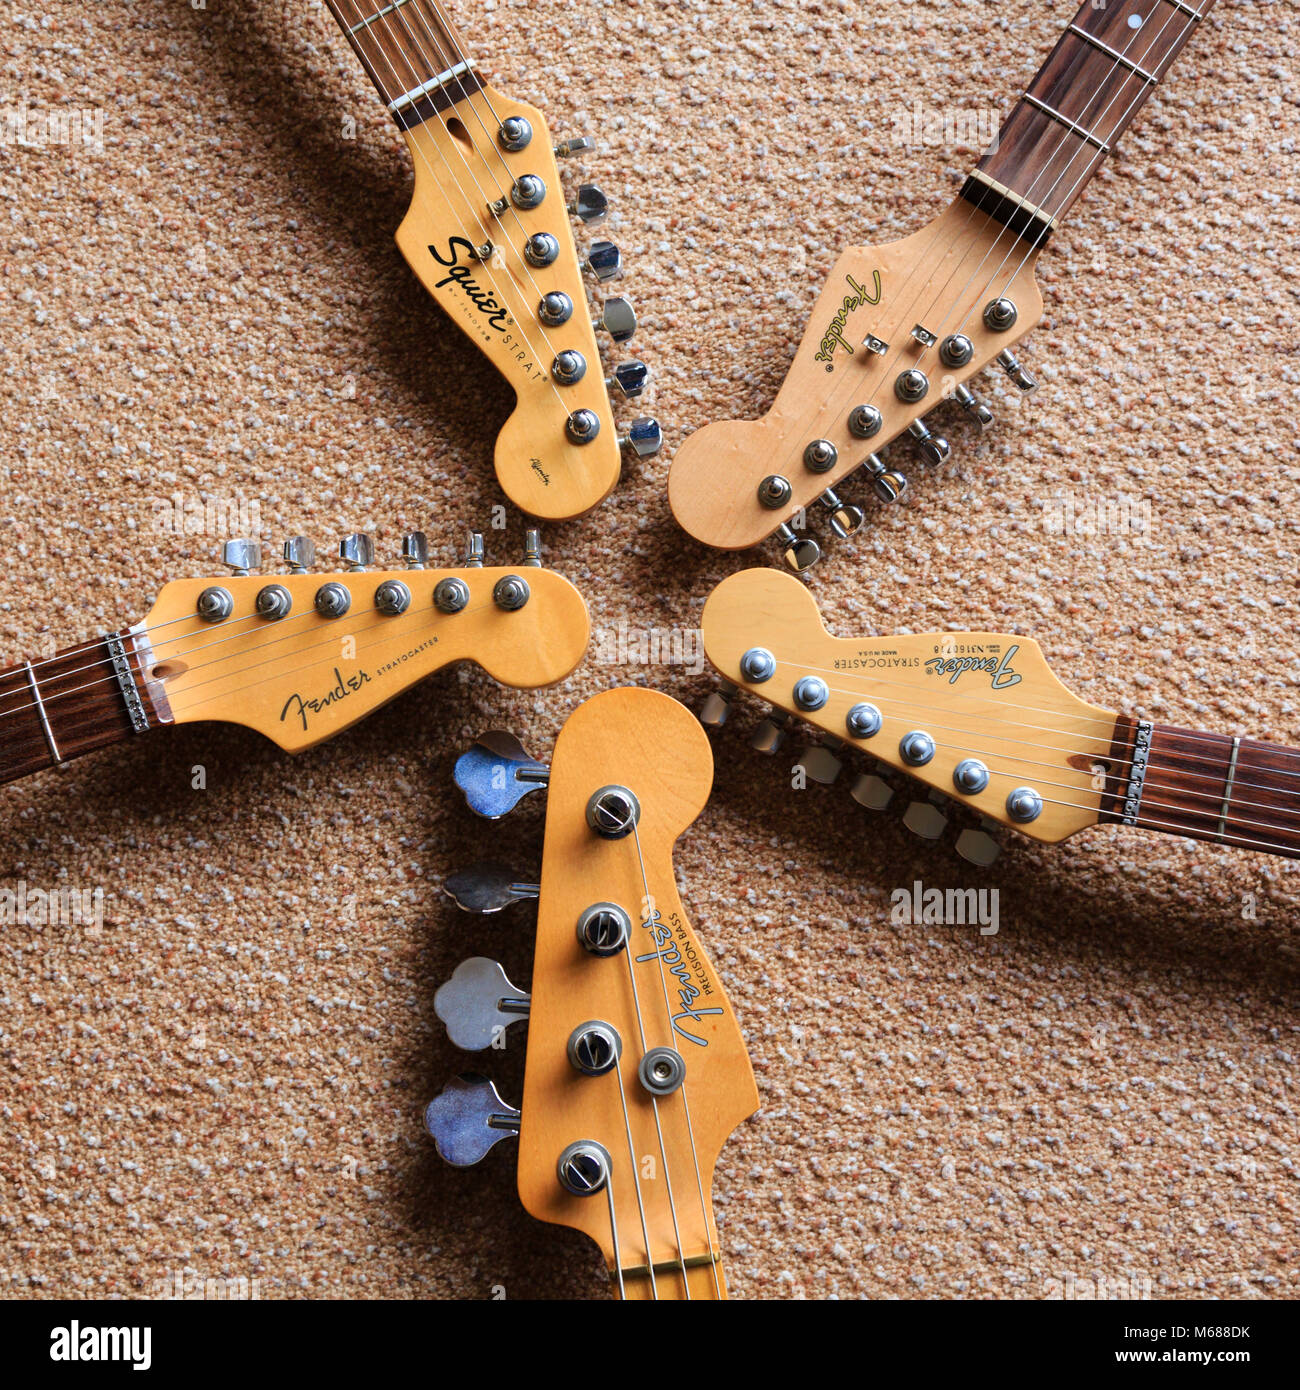 A selection of Fender guitar and bass headstocks on a carpet background. Shown are Stratocasters, a Precision P bass and a budget Squier guitar. Stock Photo